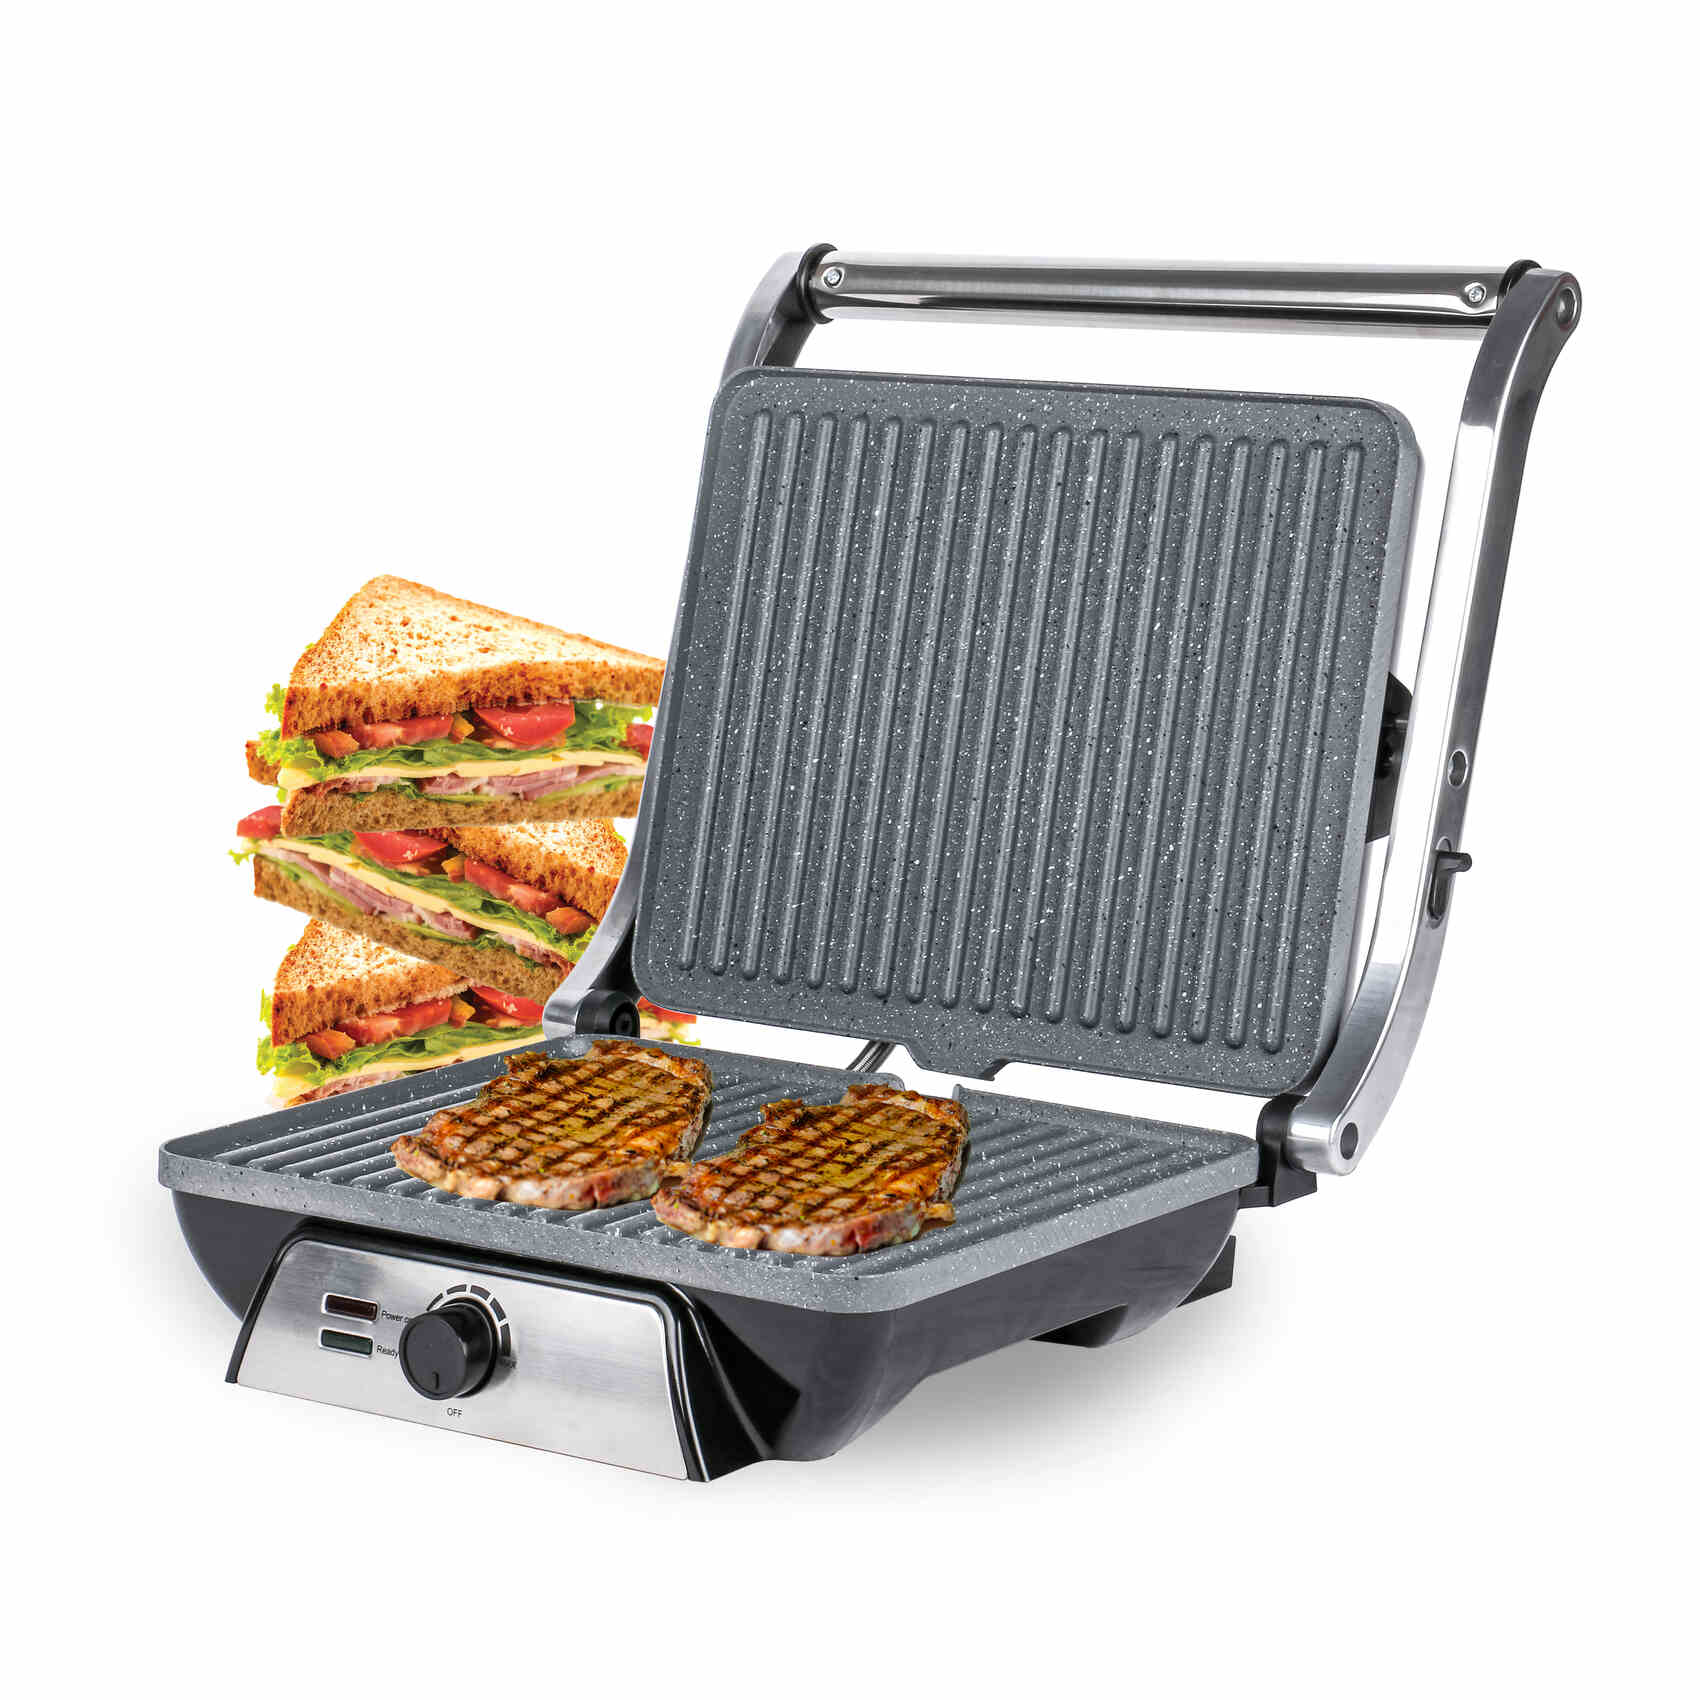 PRIMA ELECTRIC GRILL  2000W | 4 SLICE ELECTRIC GRILL | FULL METAL HANDLE | OIL CONTAINER | 180 OPEN DEGREE | ADJUSTABLE TEMPERATURE CONTROL GR-02